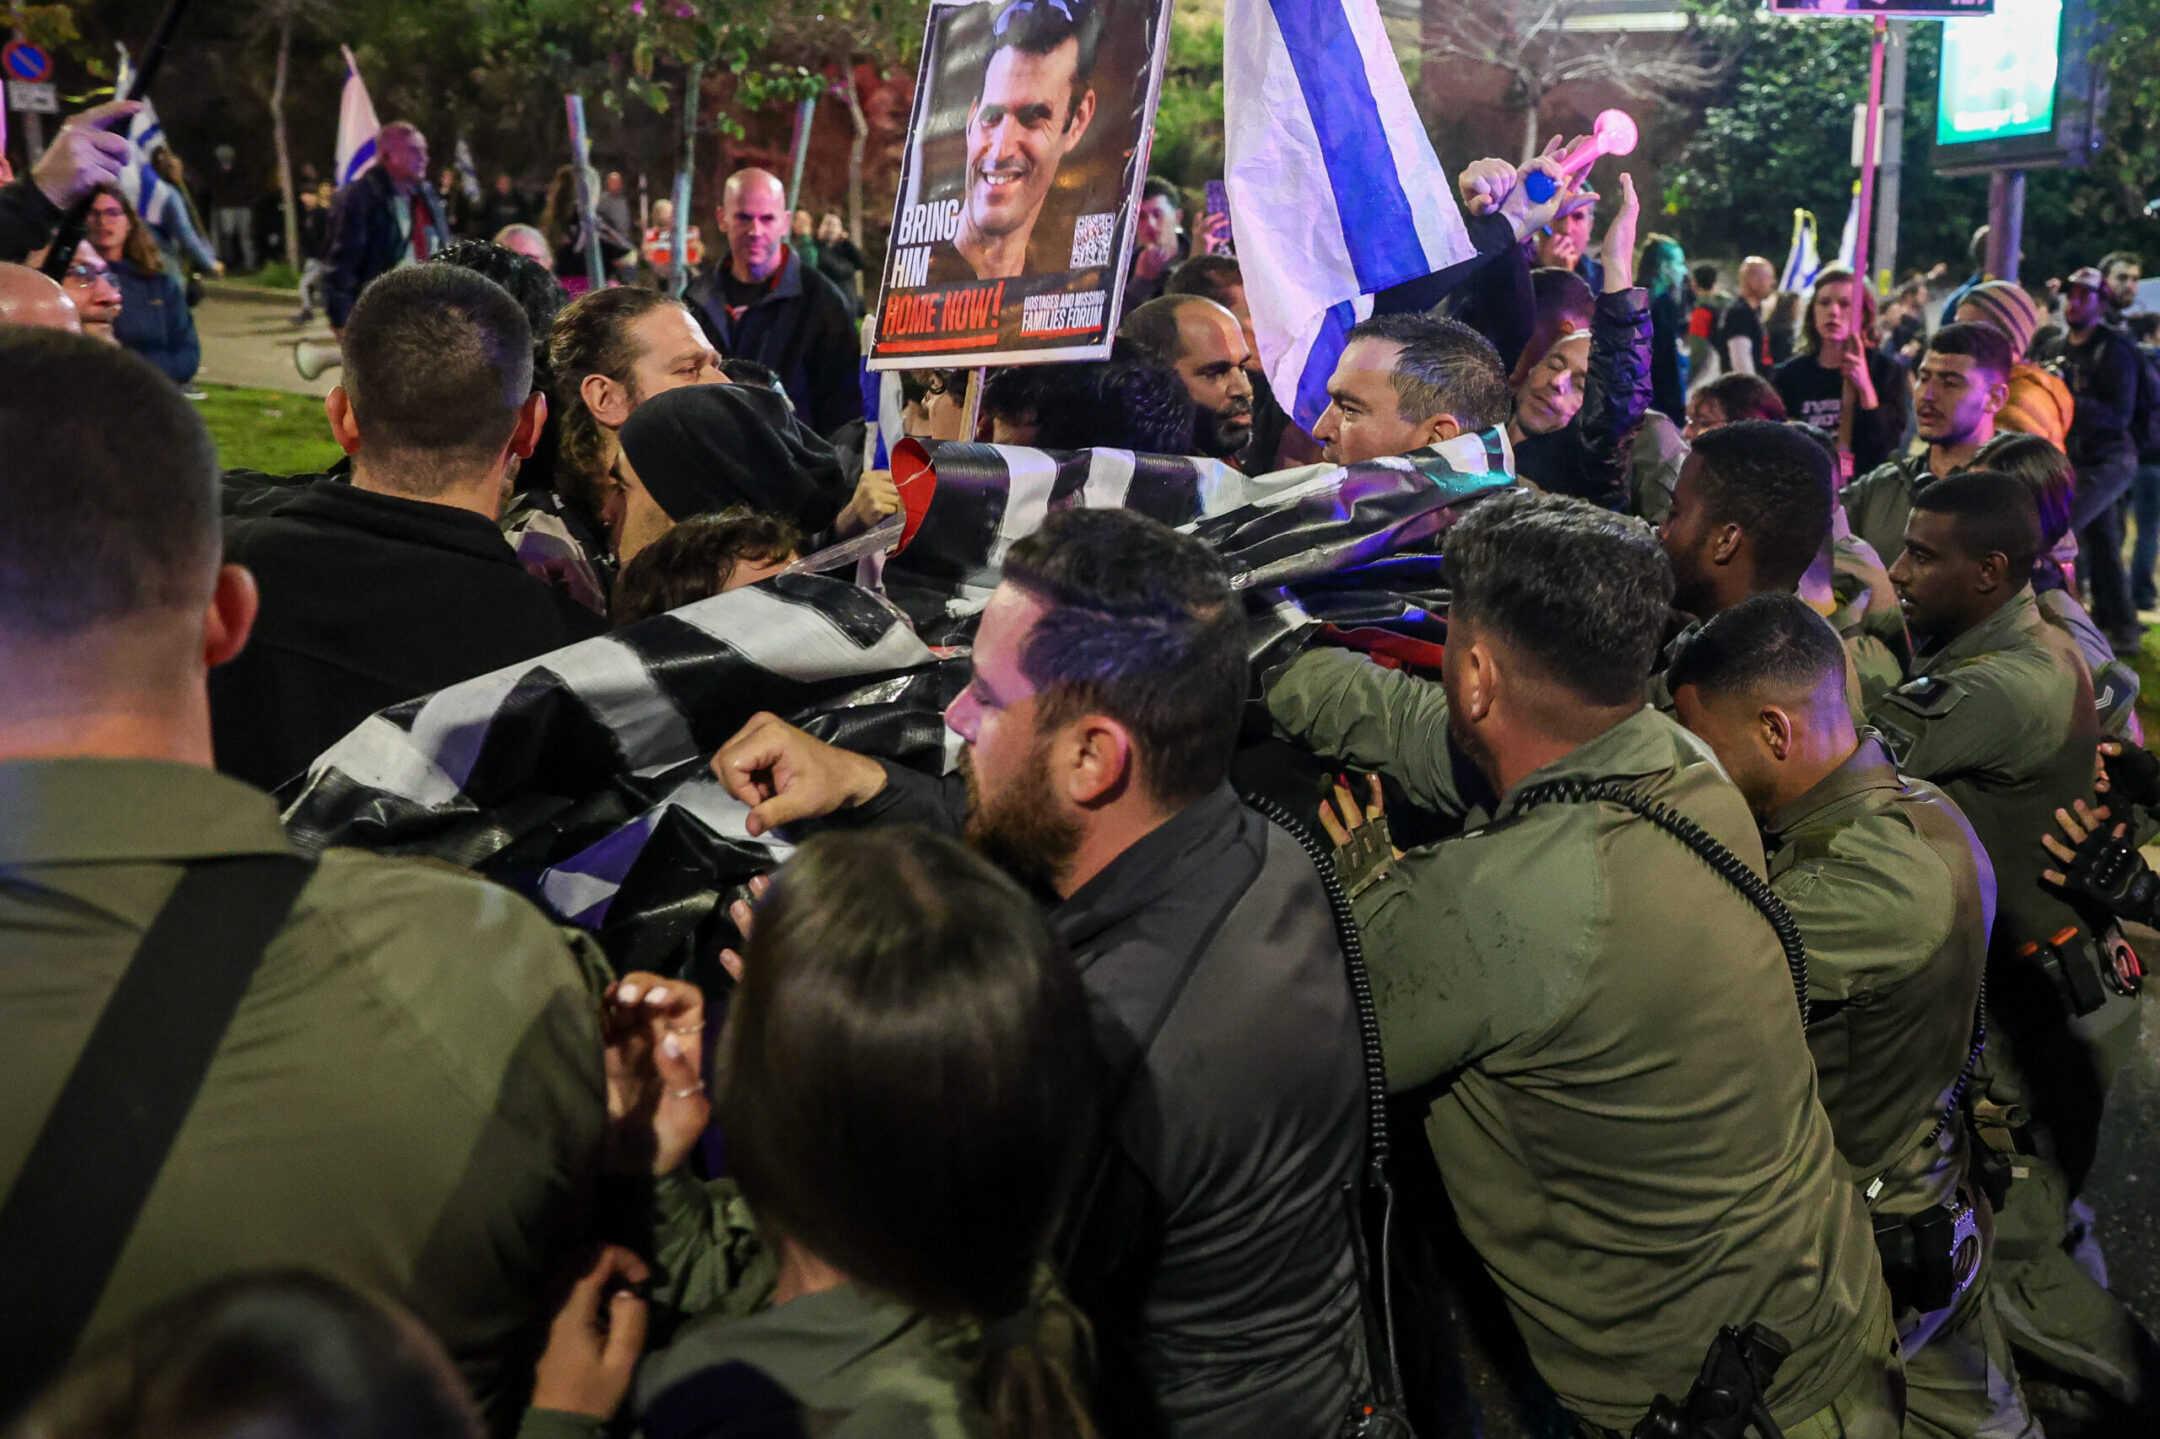 Israeli authorities are investigating after police crack down on anti-government protesters in Tel Aviv